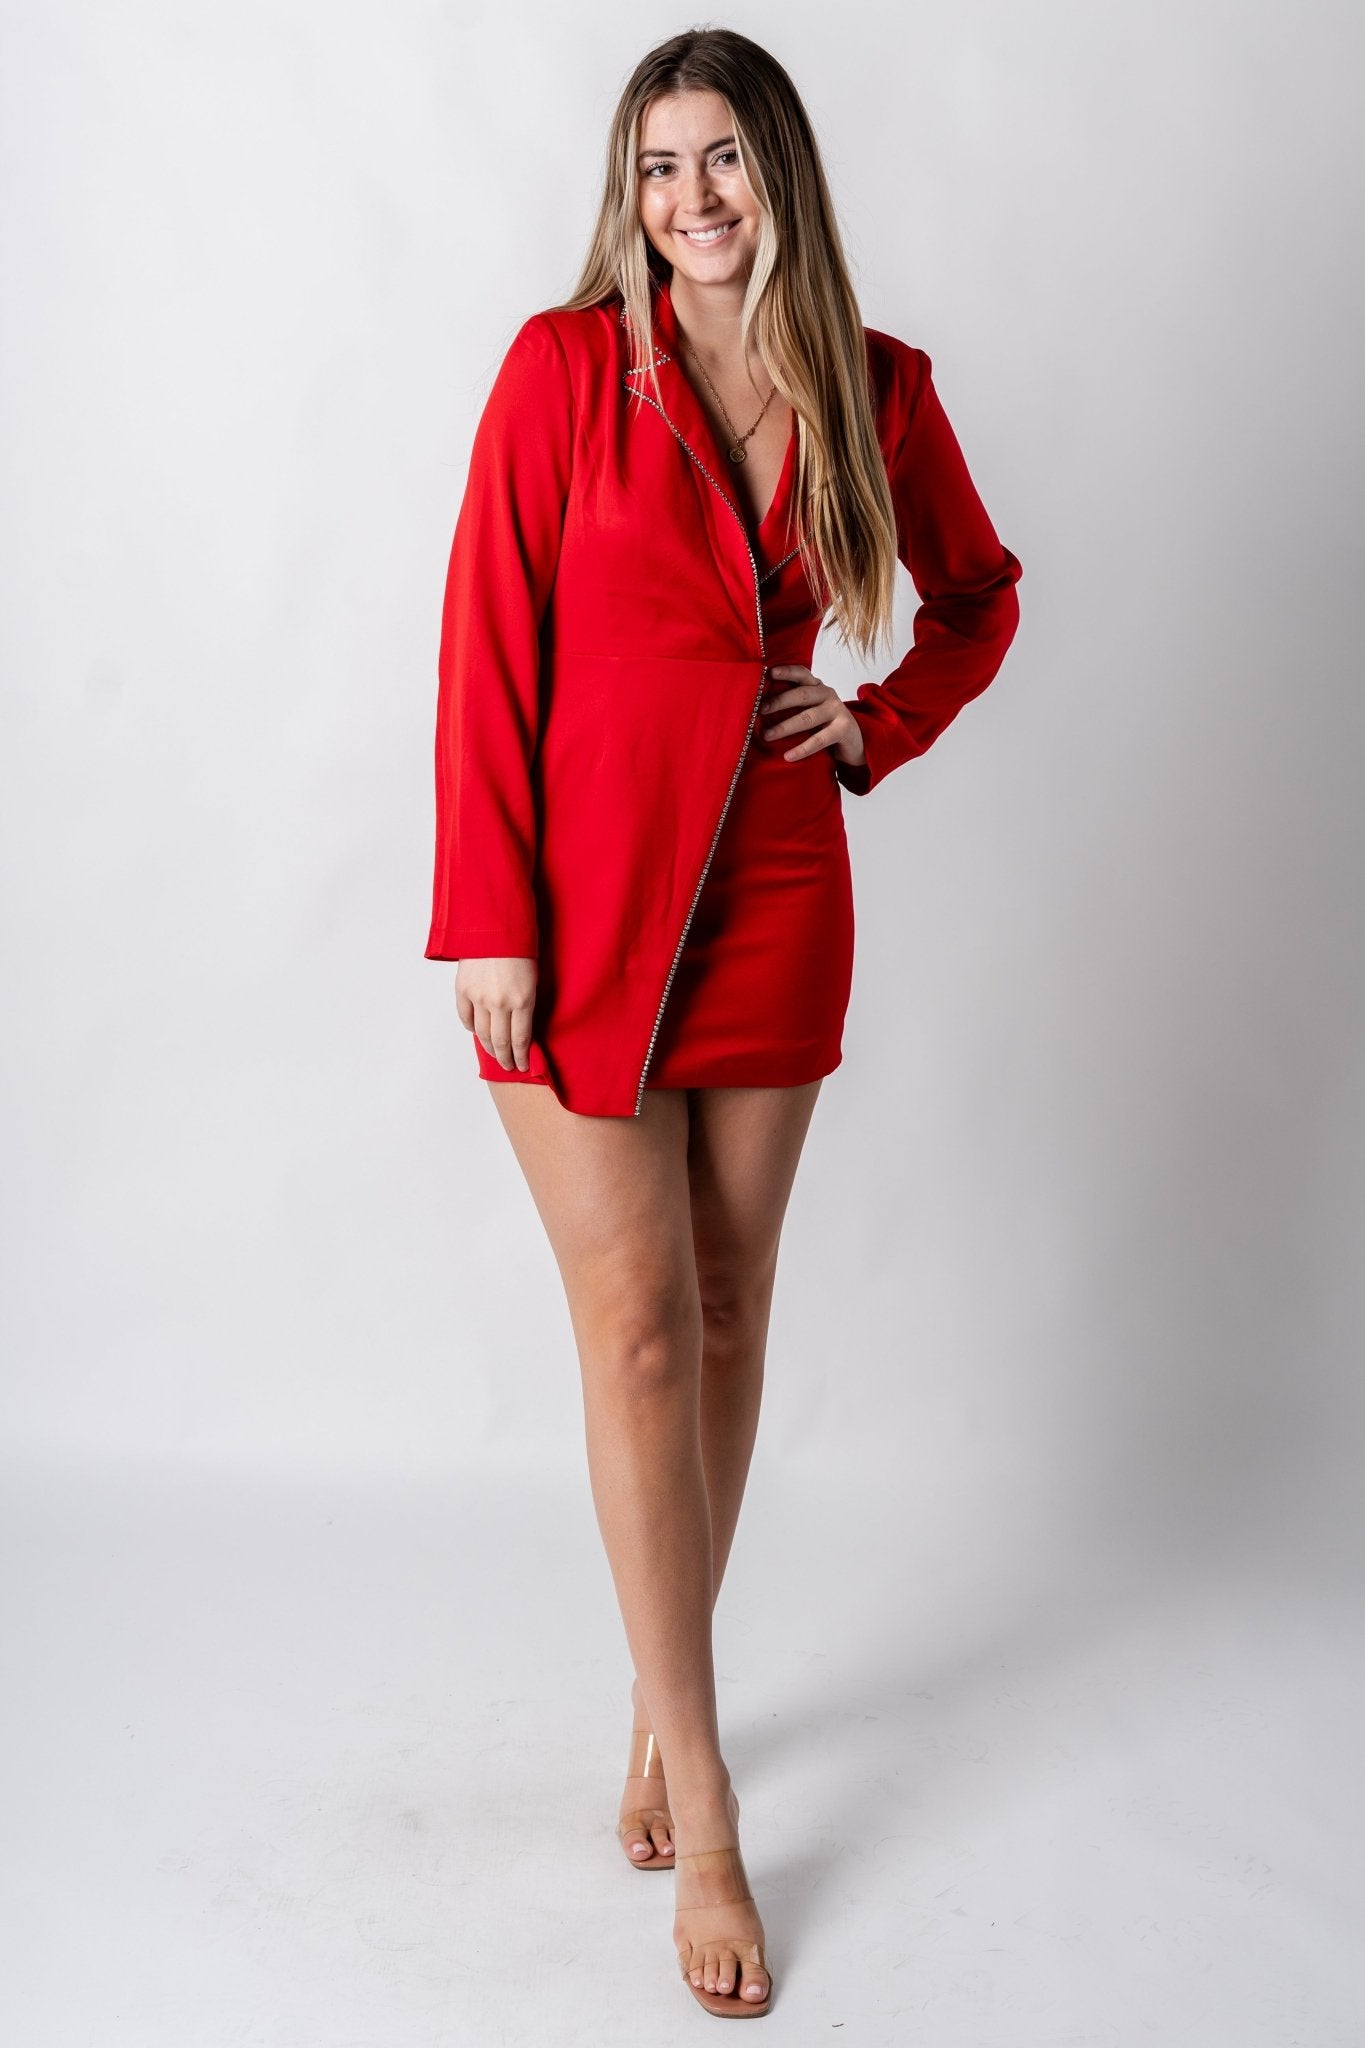 Rhinestone detail blazer dress flame red - Exclusive Collection of Holiday Inspired T-Shirts and Hoodies at Lush Fashion Lounge Boutique in Oklahoma City